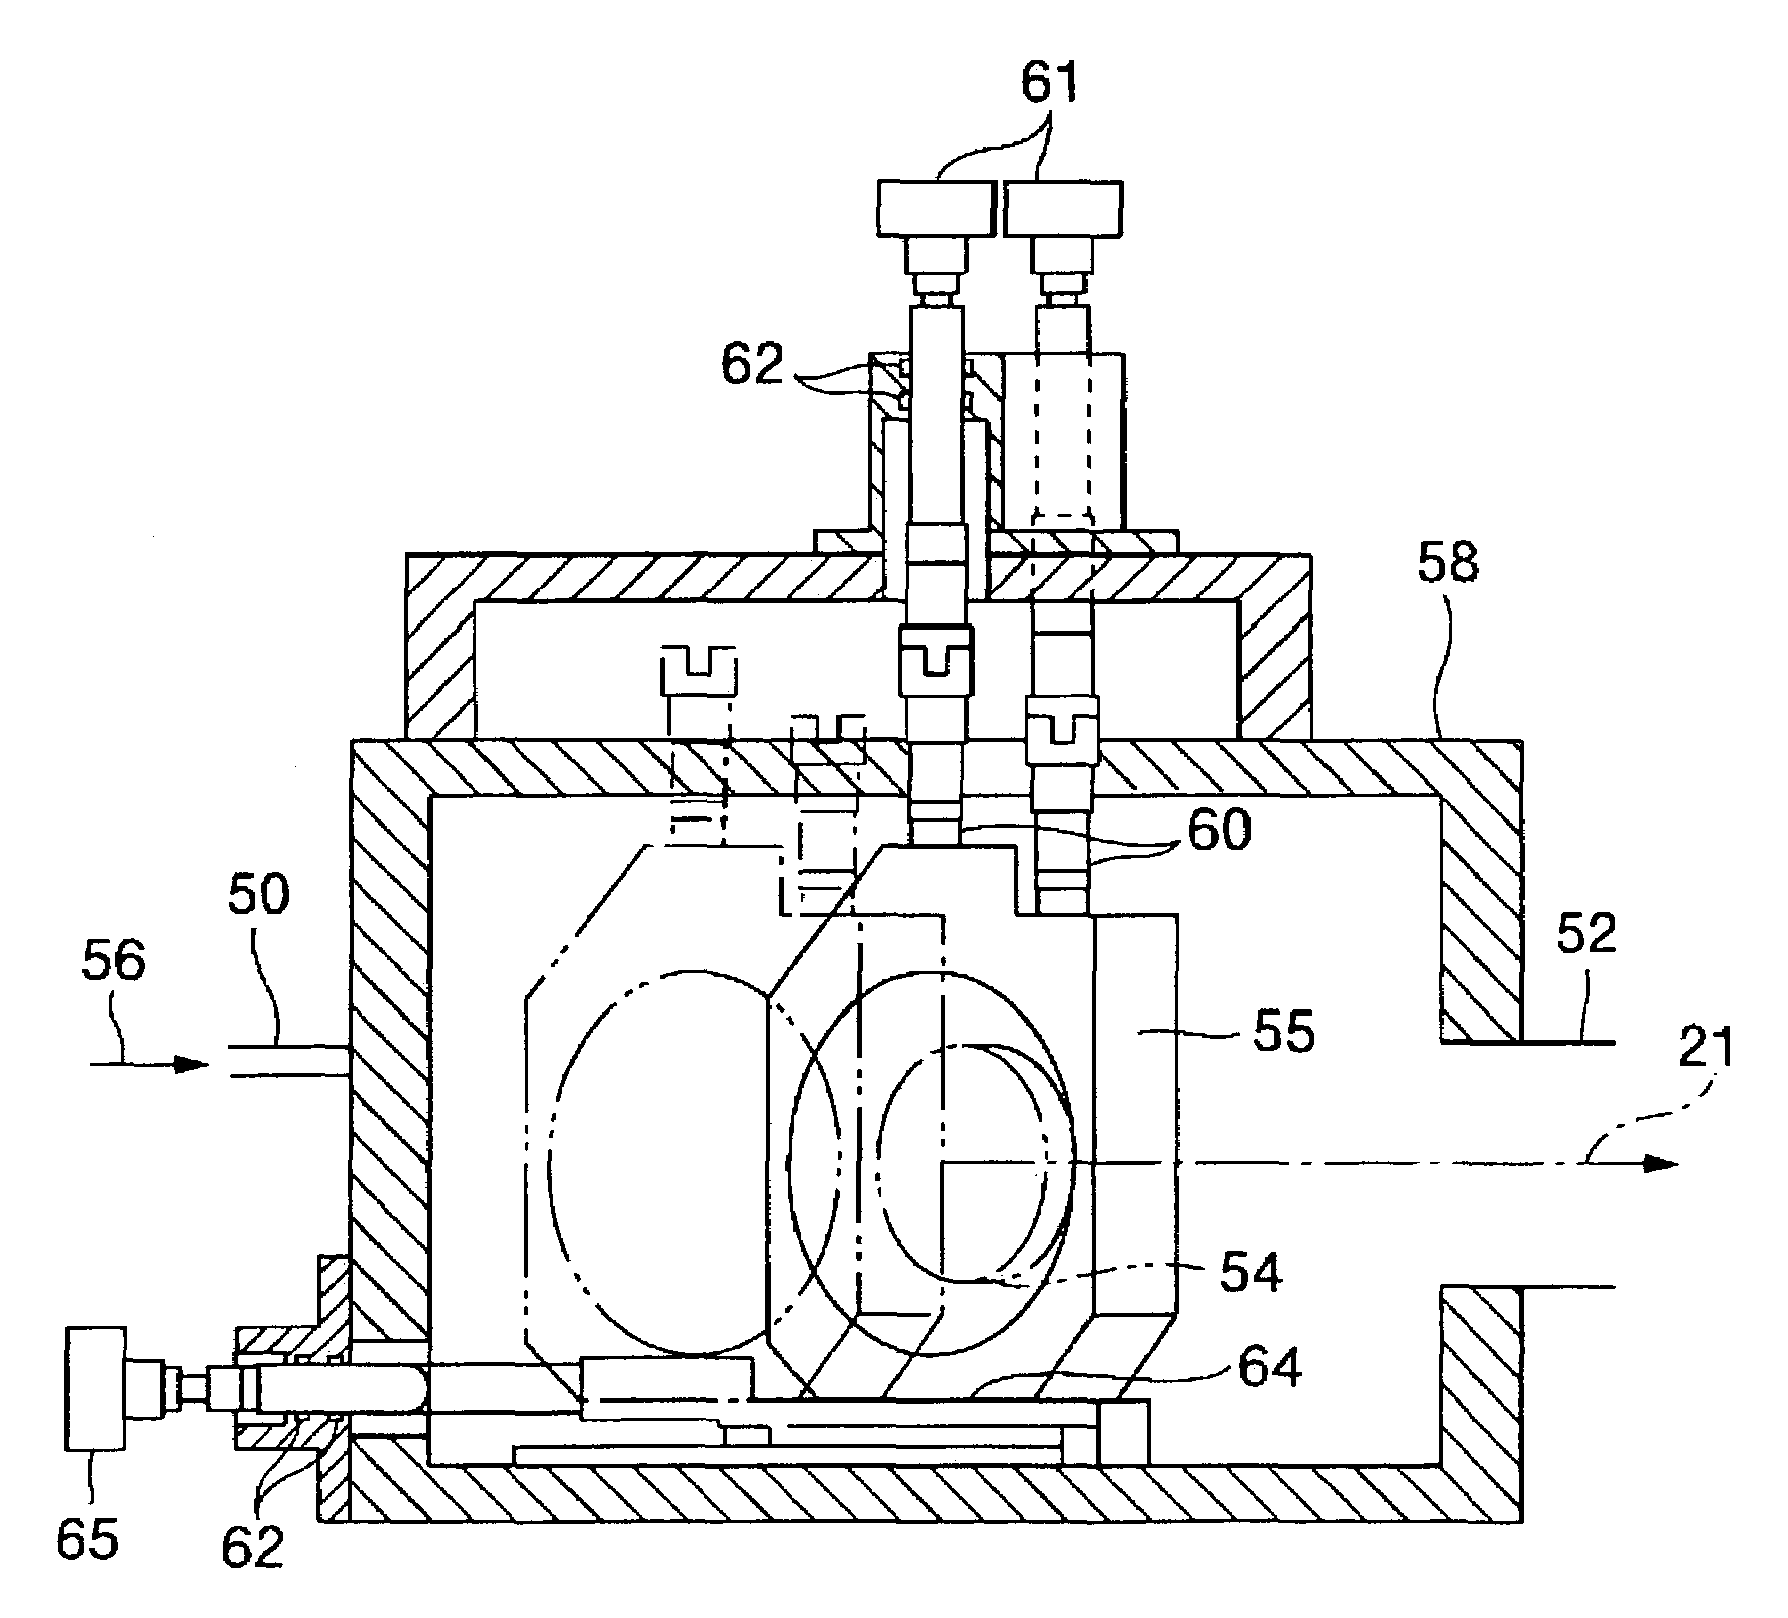 Injection locking type or MOPA type of gas laser device